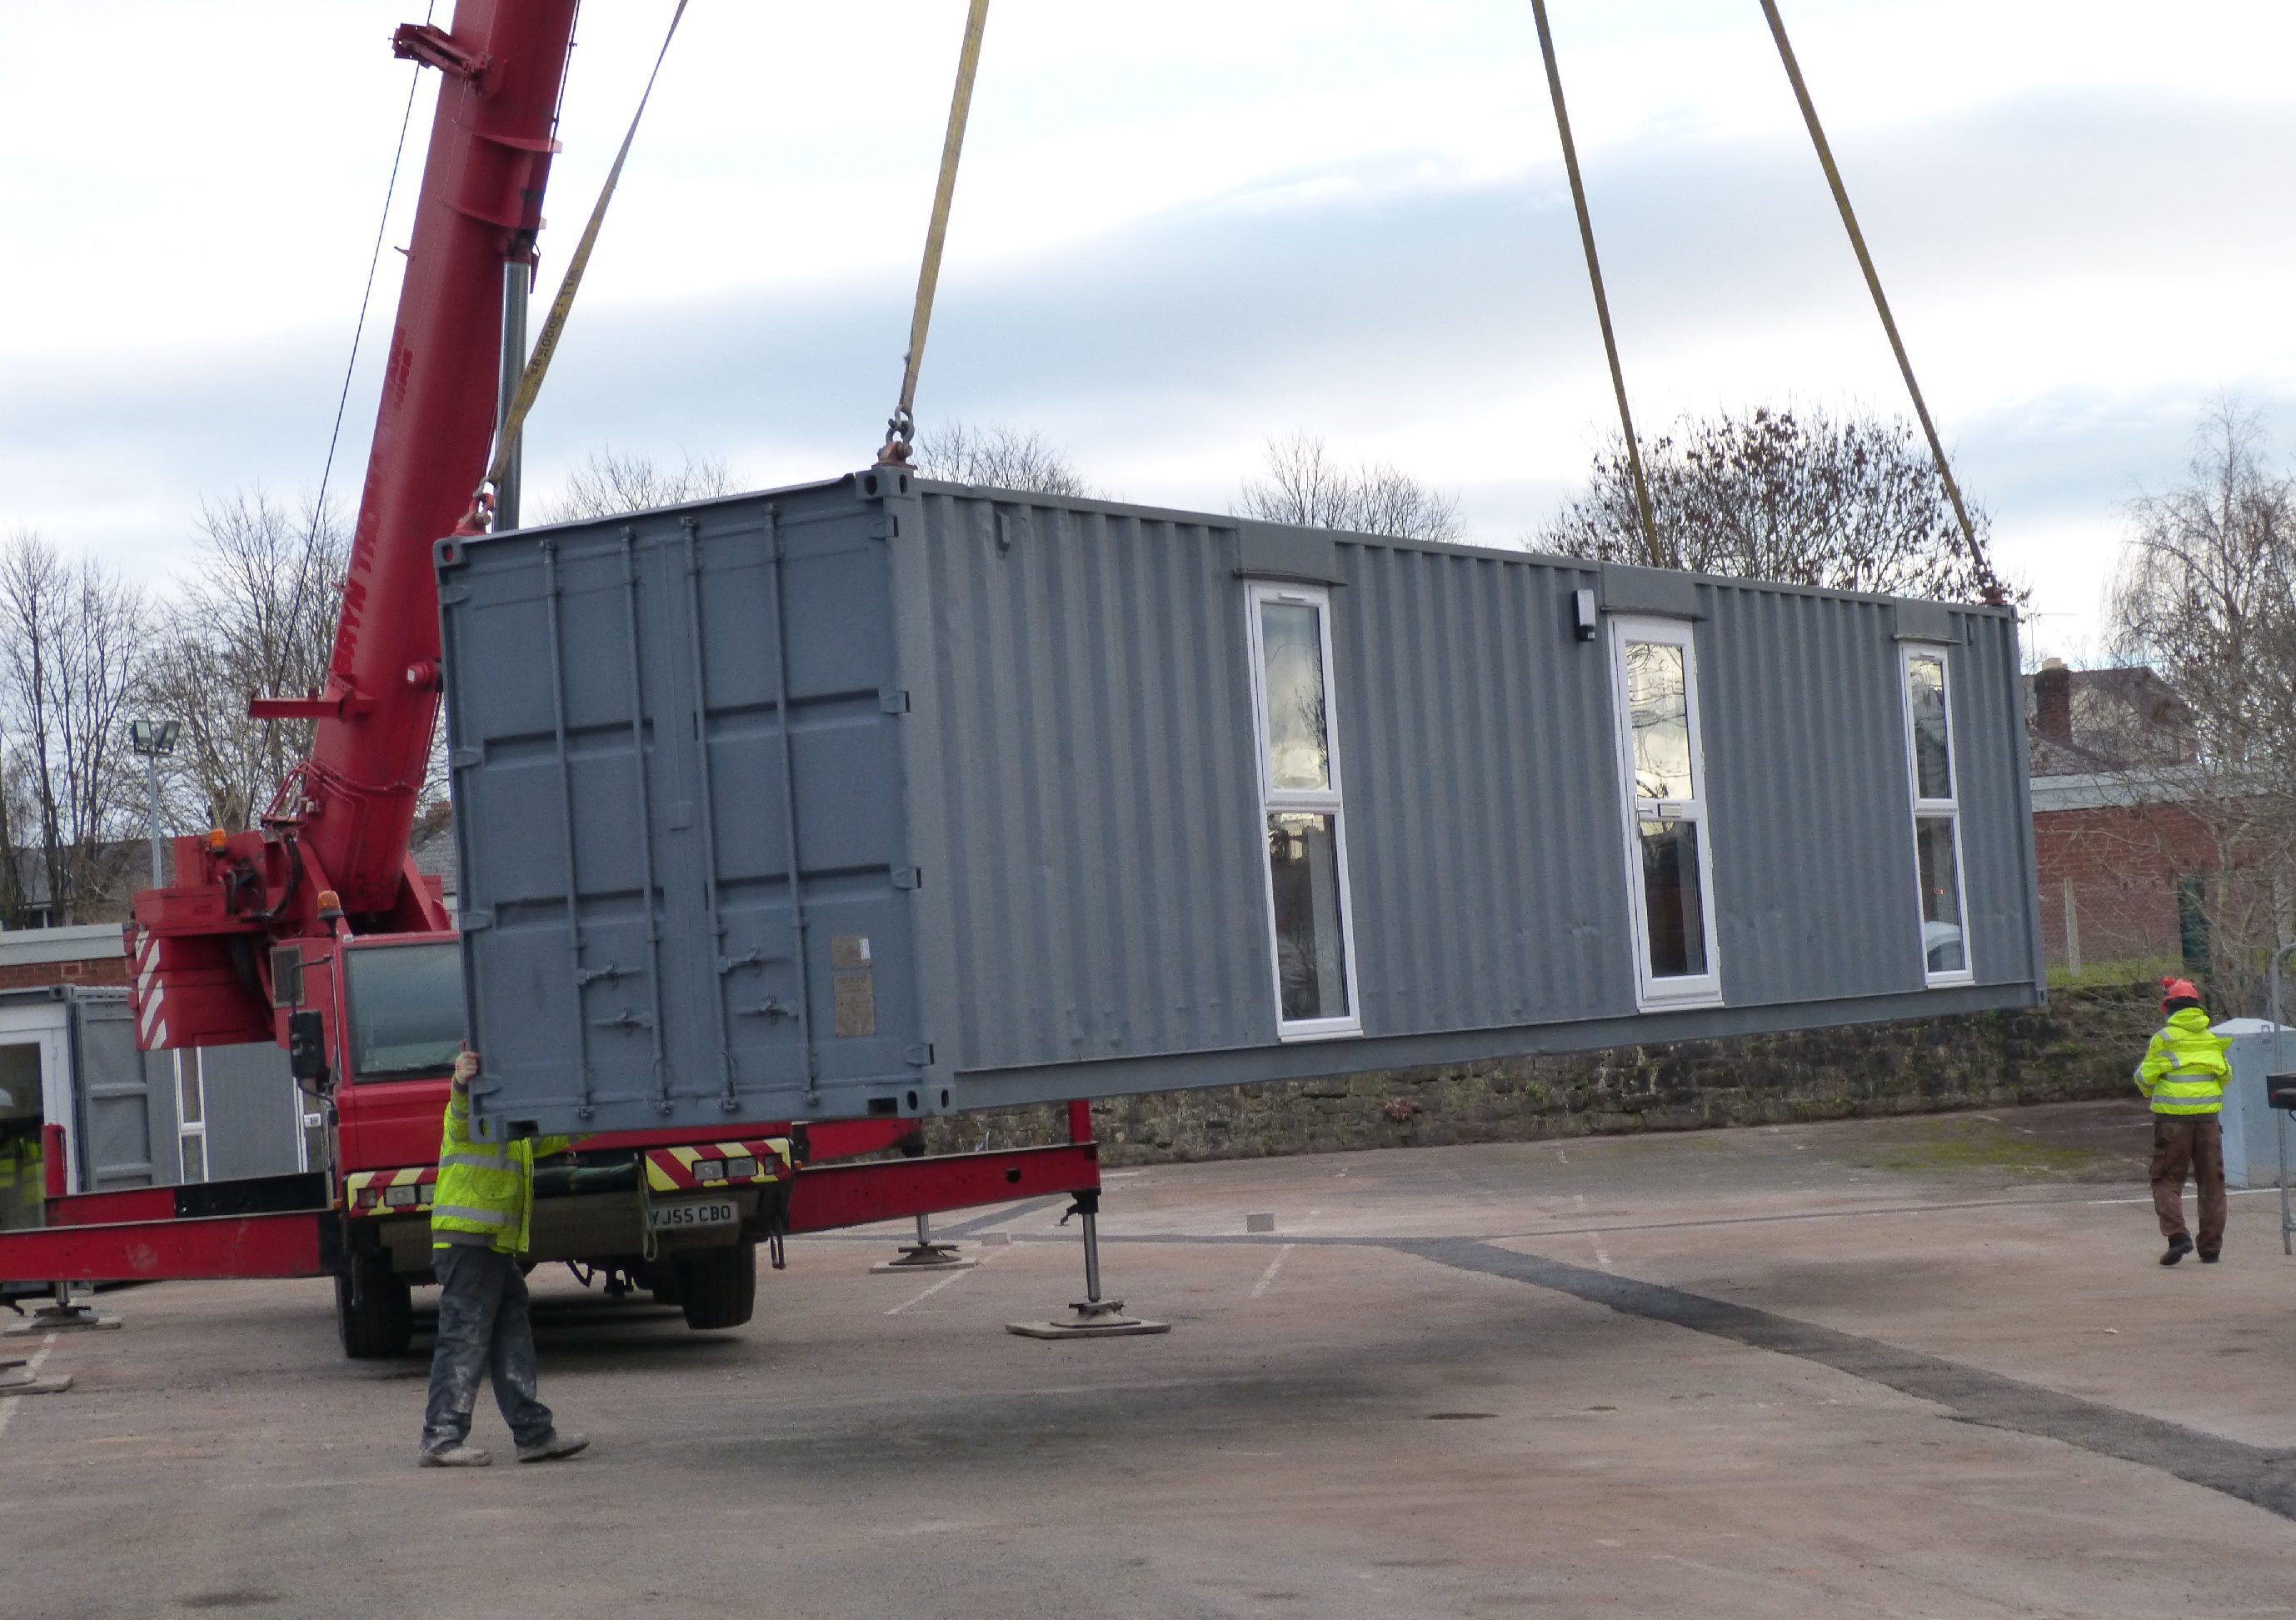 New modular homes will "give support to those who need it most"